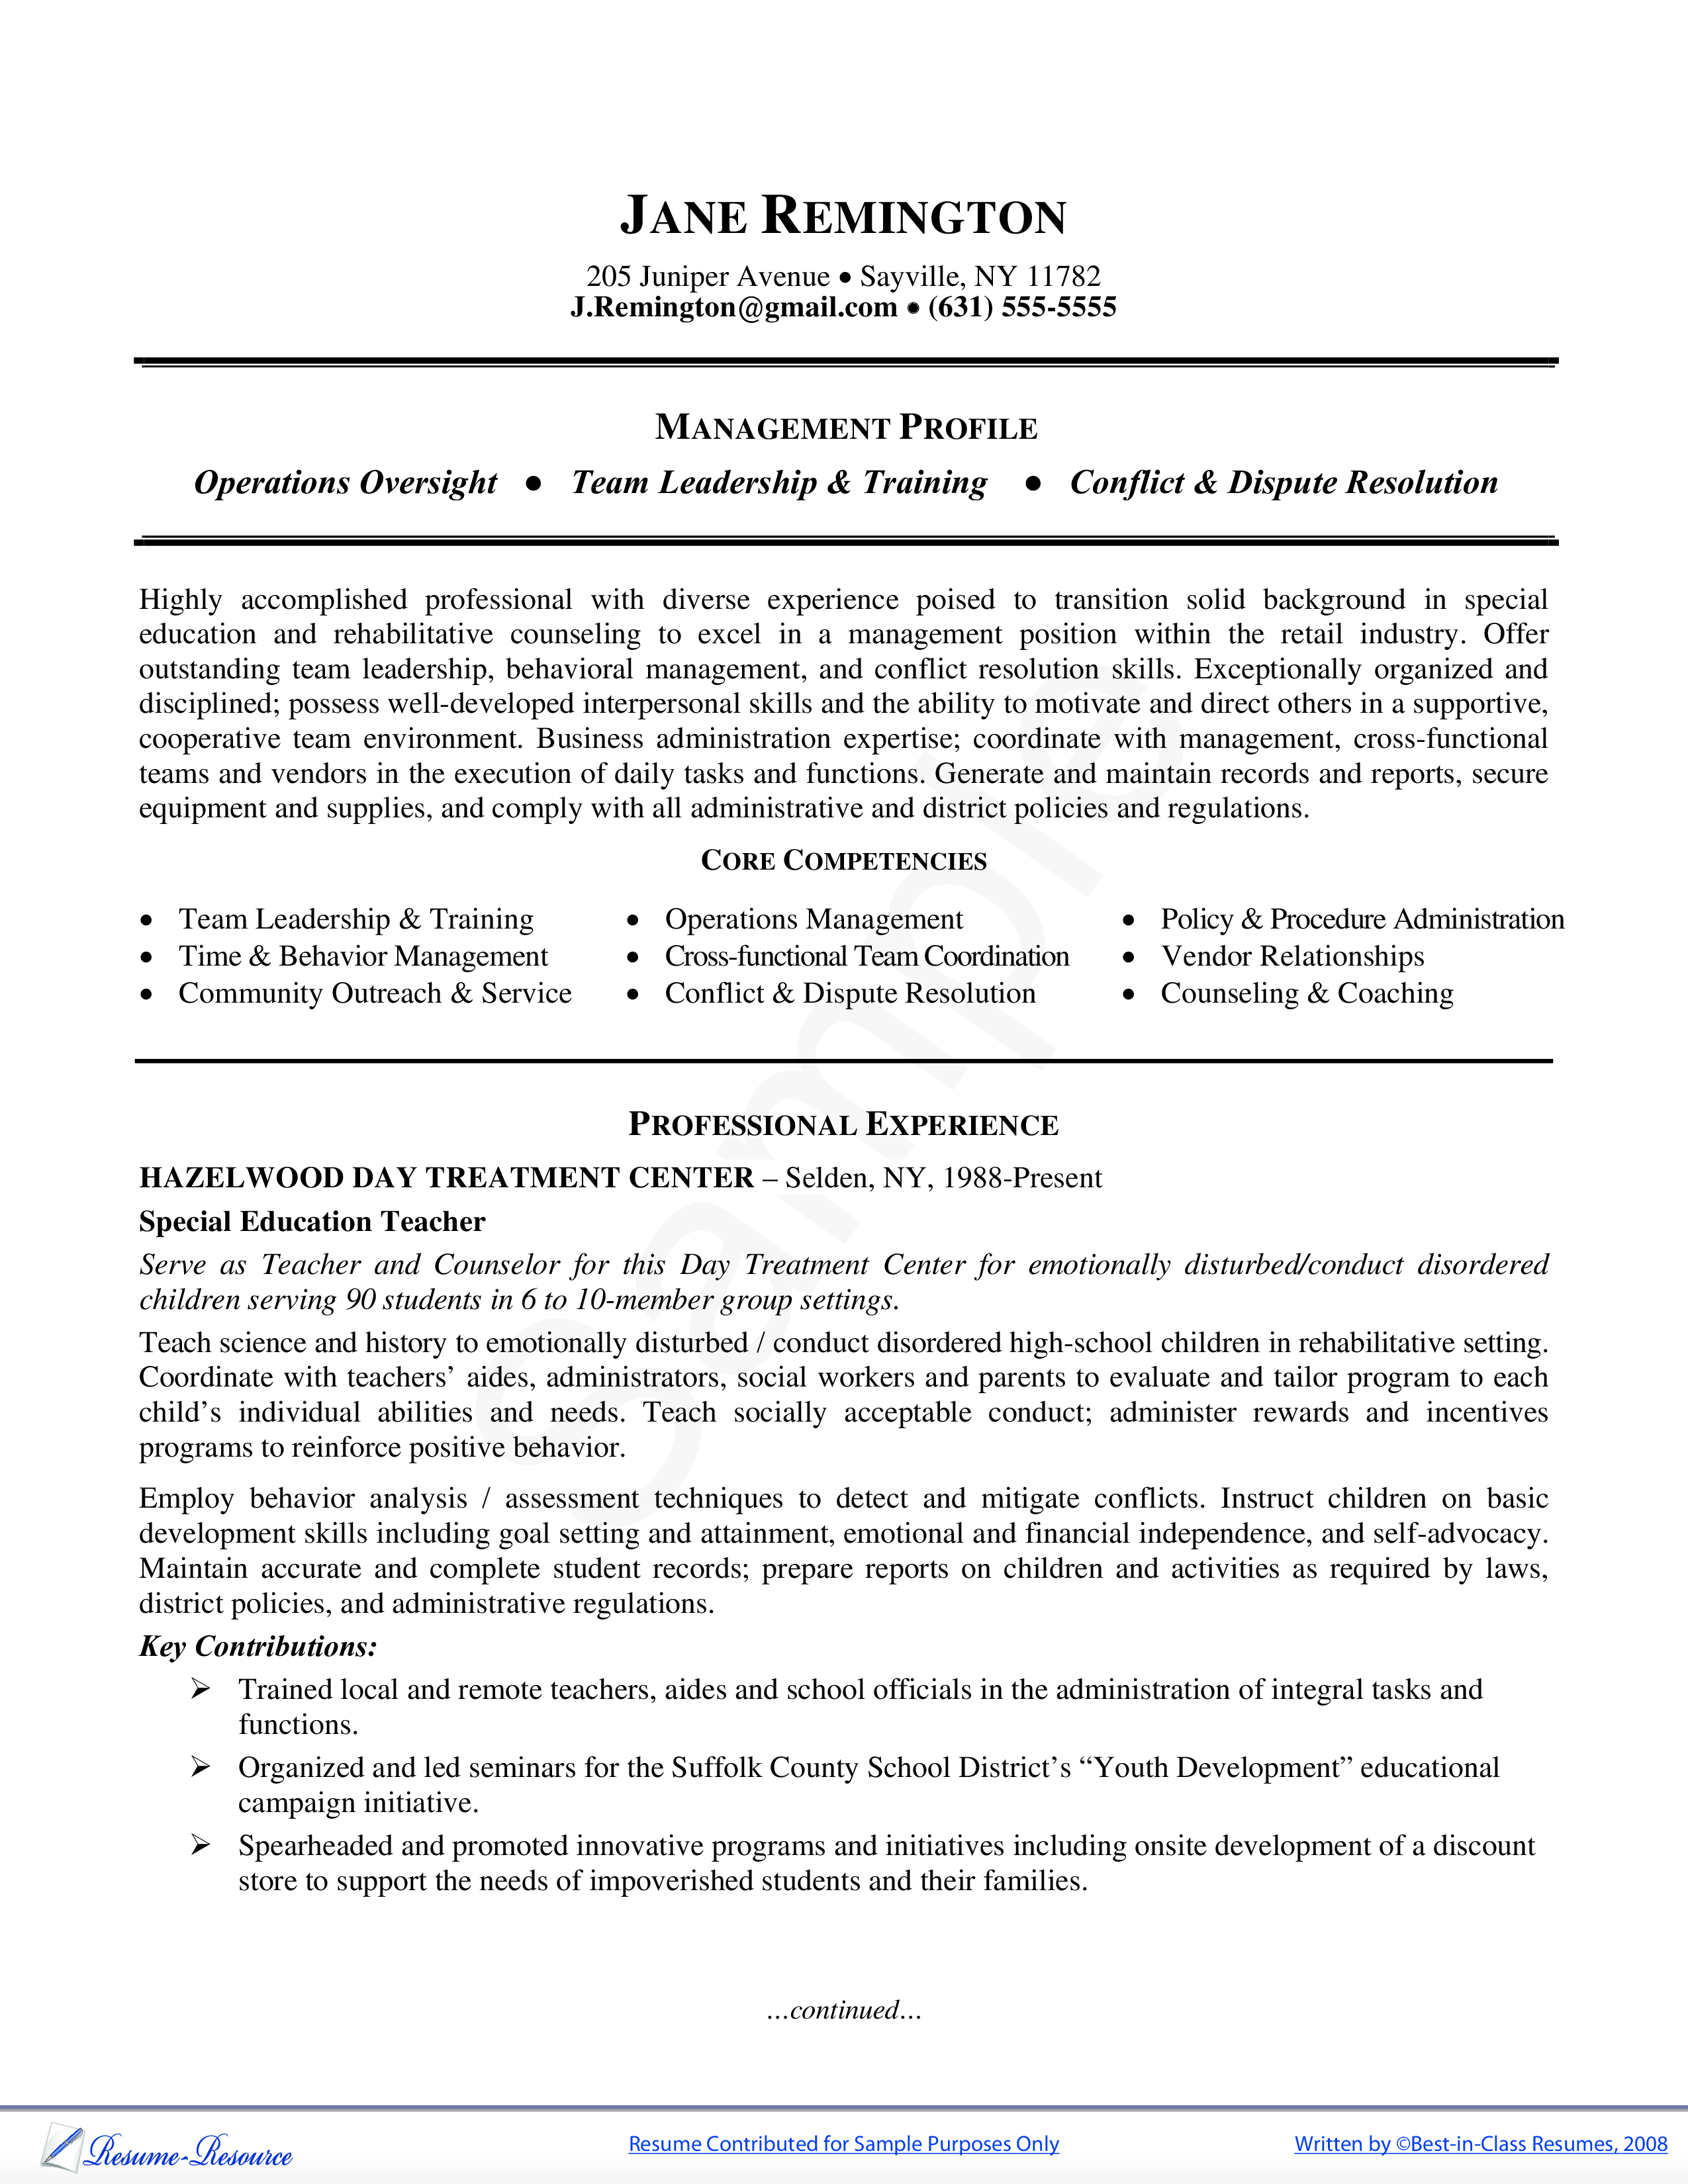 functional resume template for career change